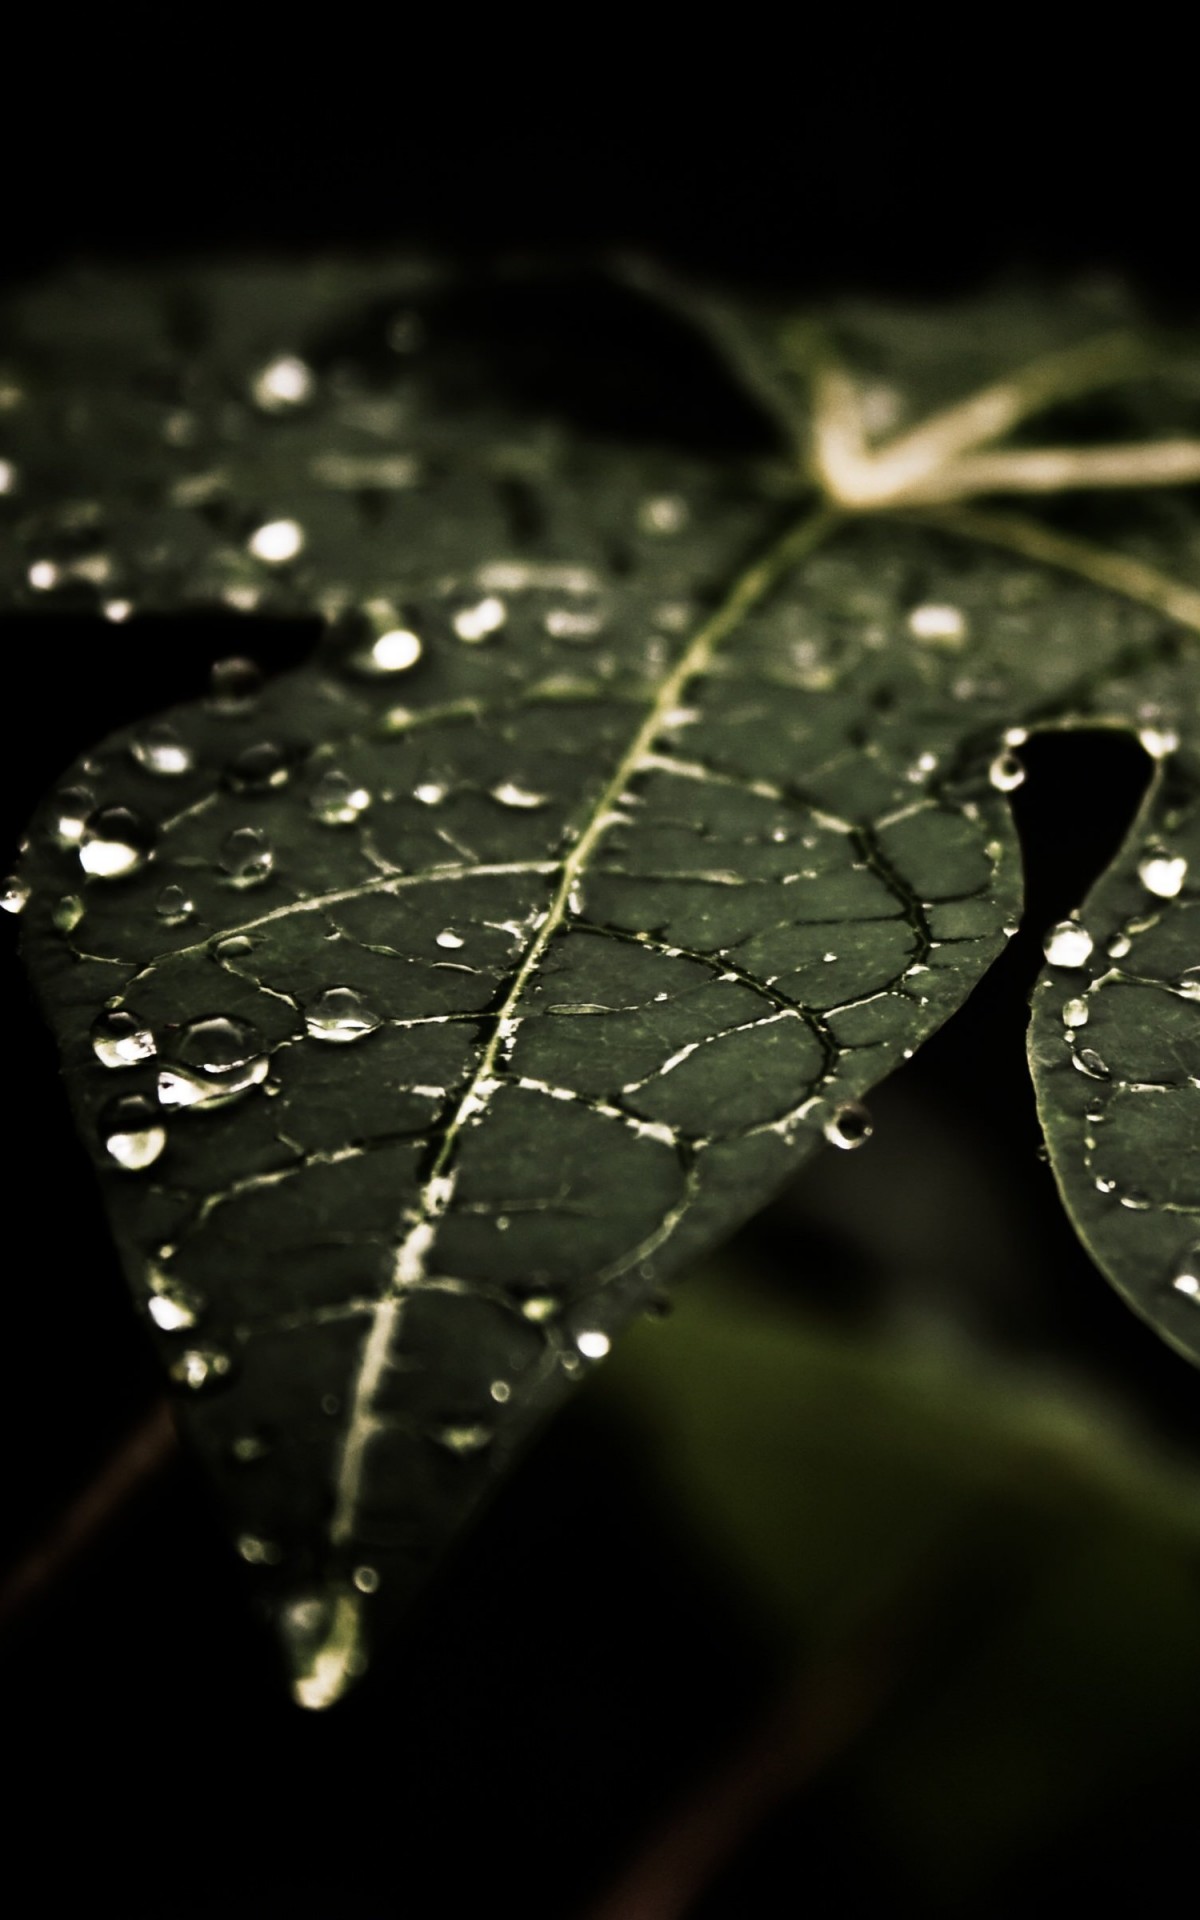 Droplets On Leaves Wallpaper for Amazon Kindle Fire HDX